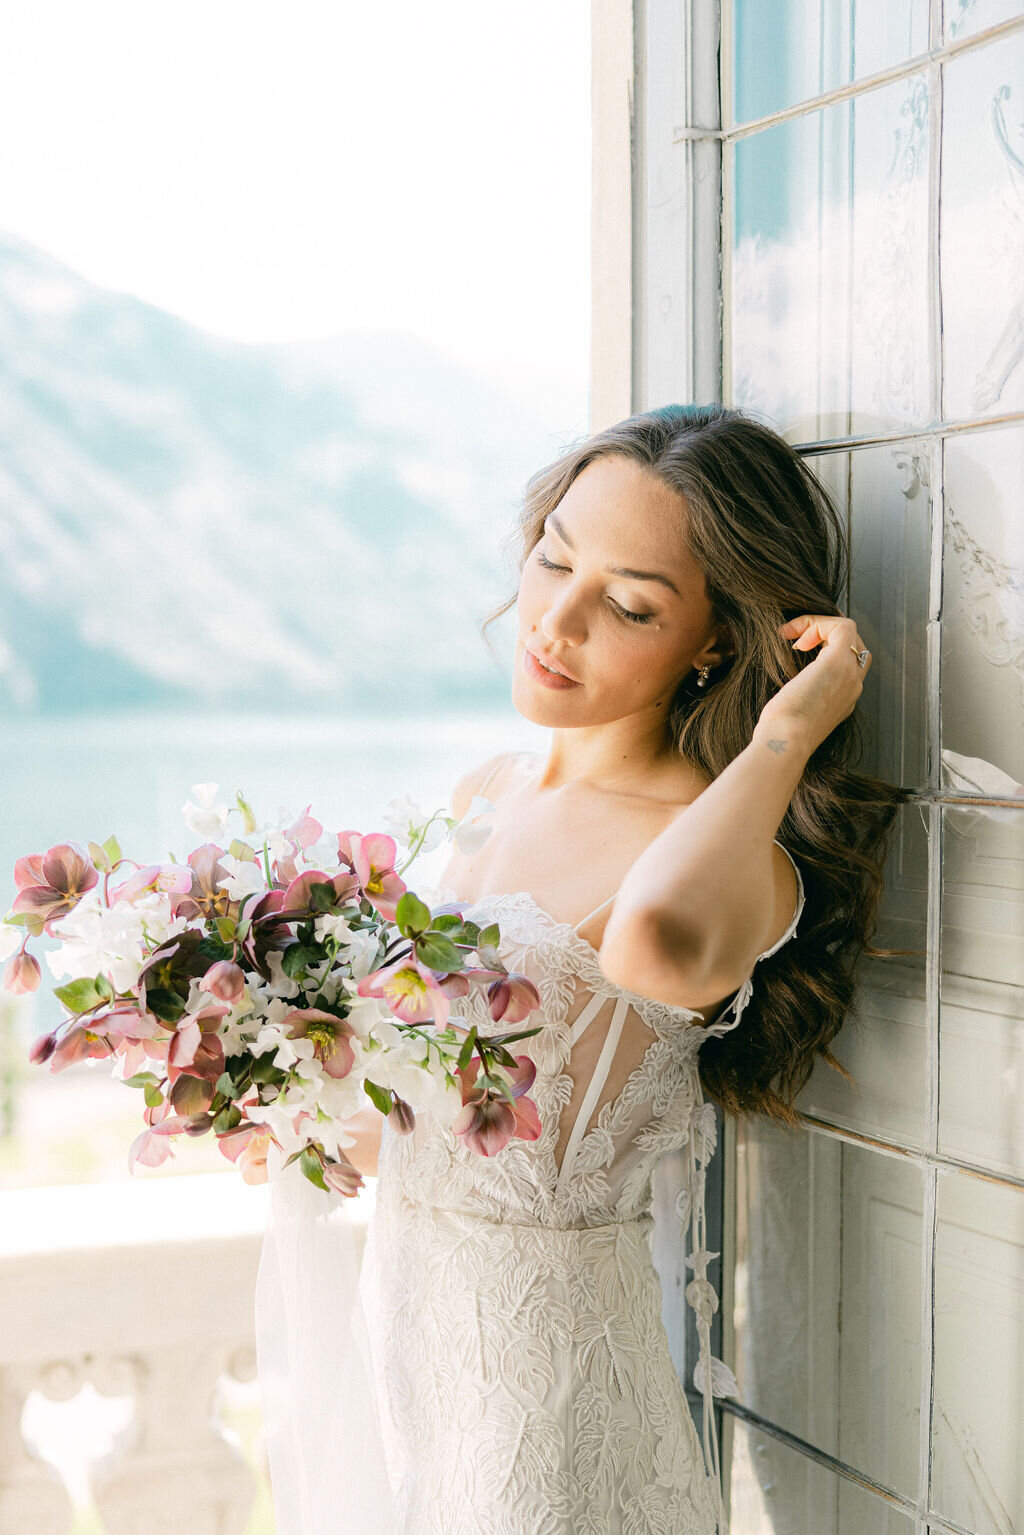 Wedding Photographer Reviews in Italy